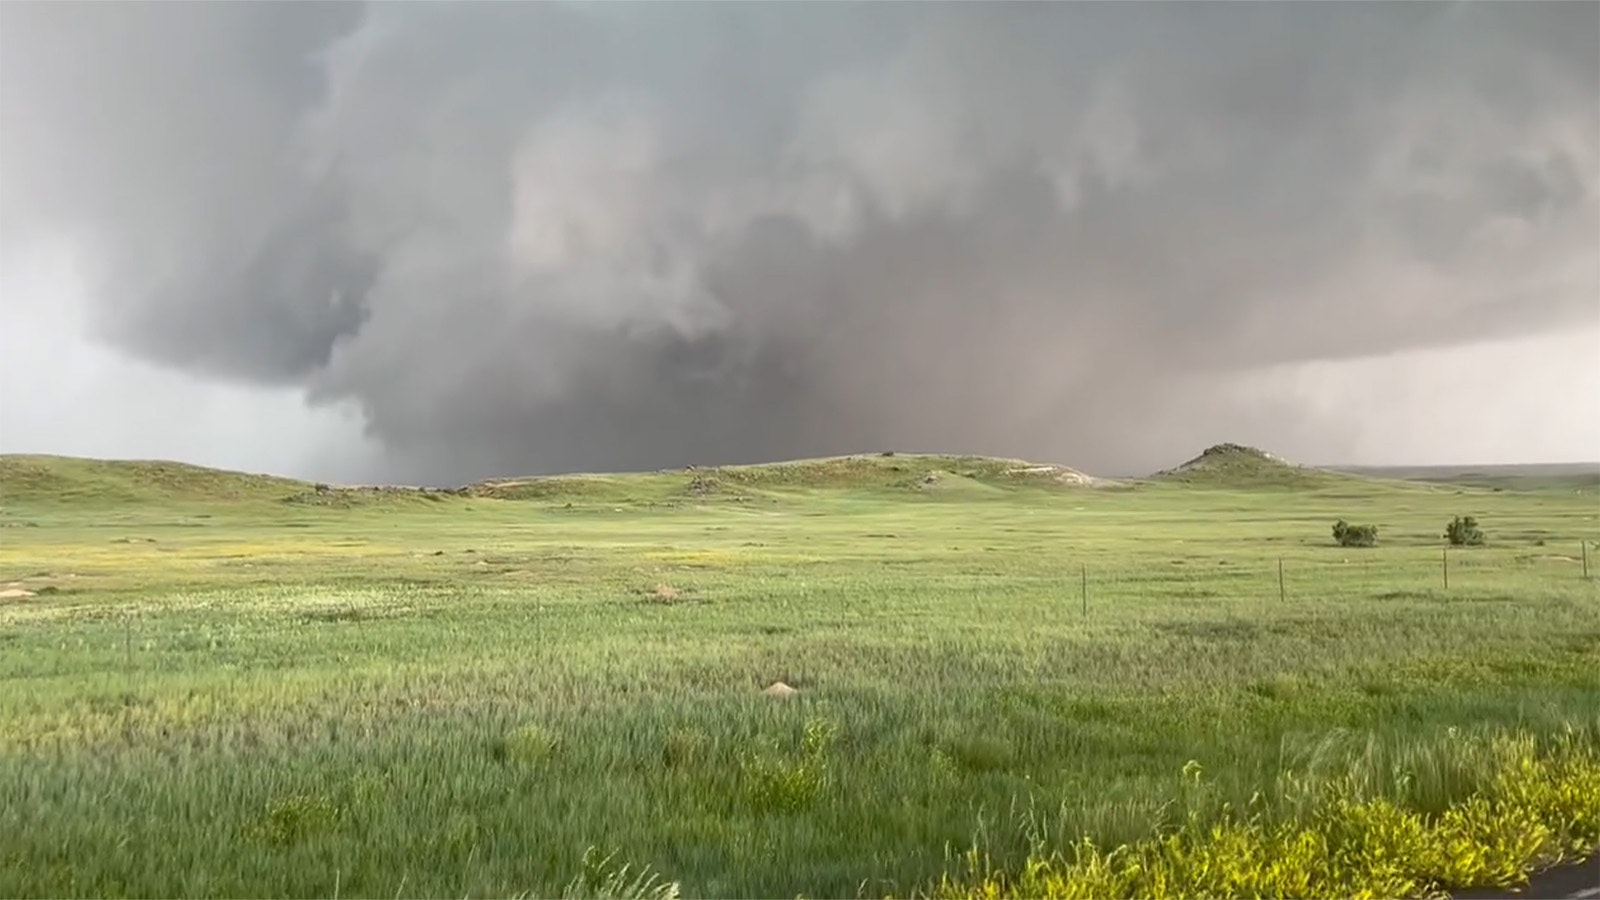 In a dramatic video he posted to Twitter, Brad Wilson captured a large tornado that hit North Antelope Rochelle mine about 60 miles south of Gillette on Friday evening.